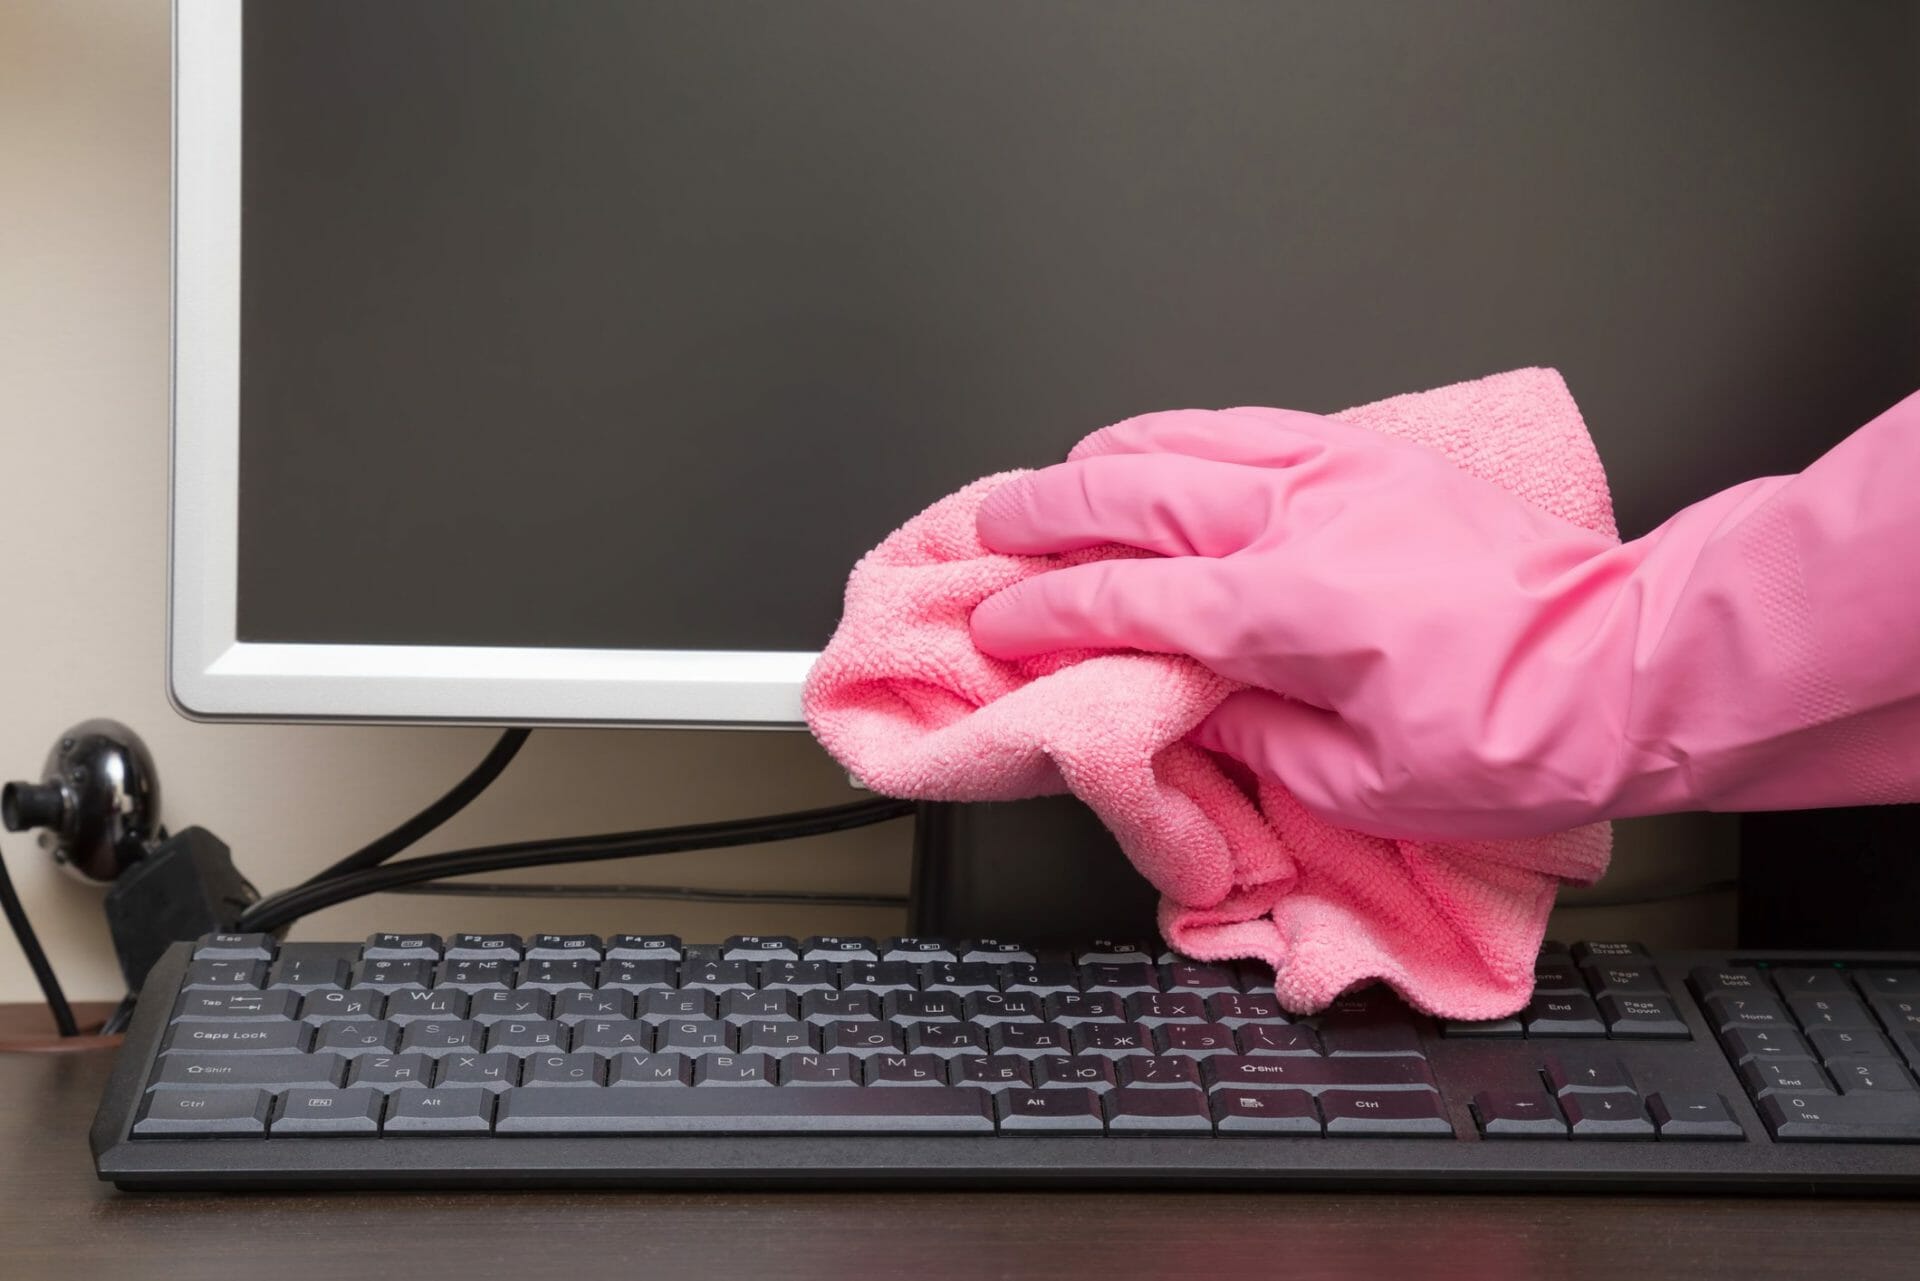 Wiping the monitor with a pink rag